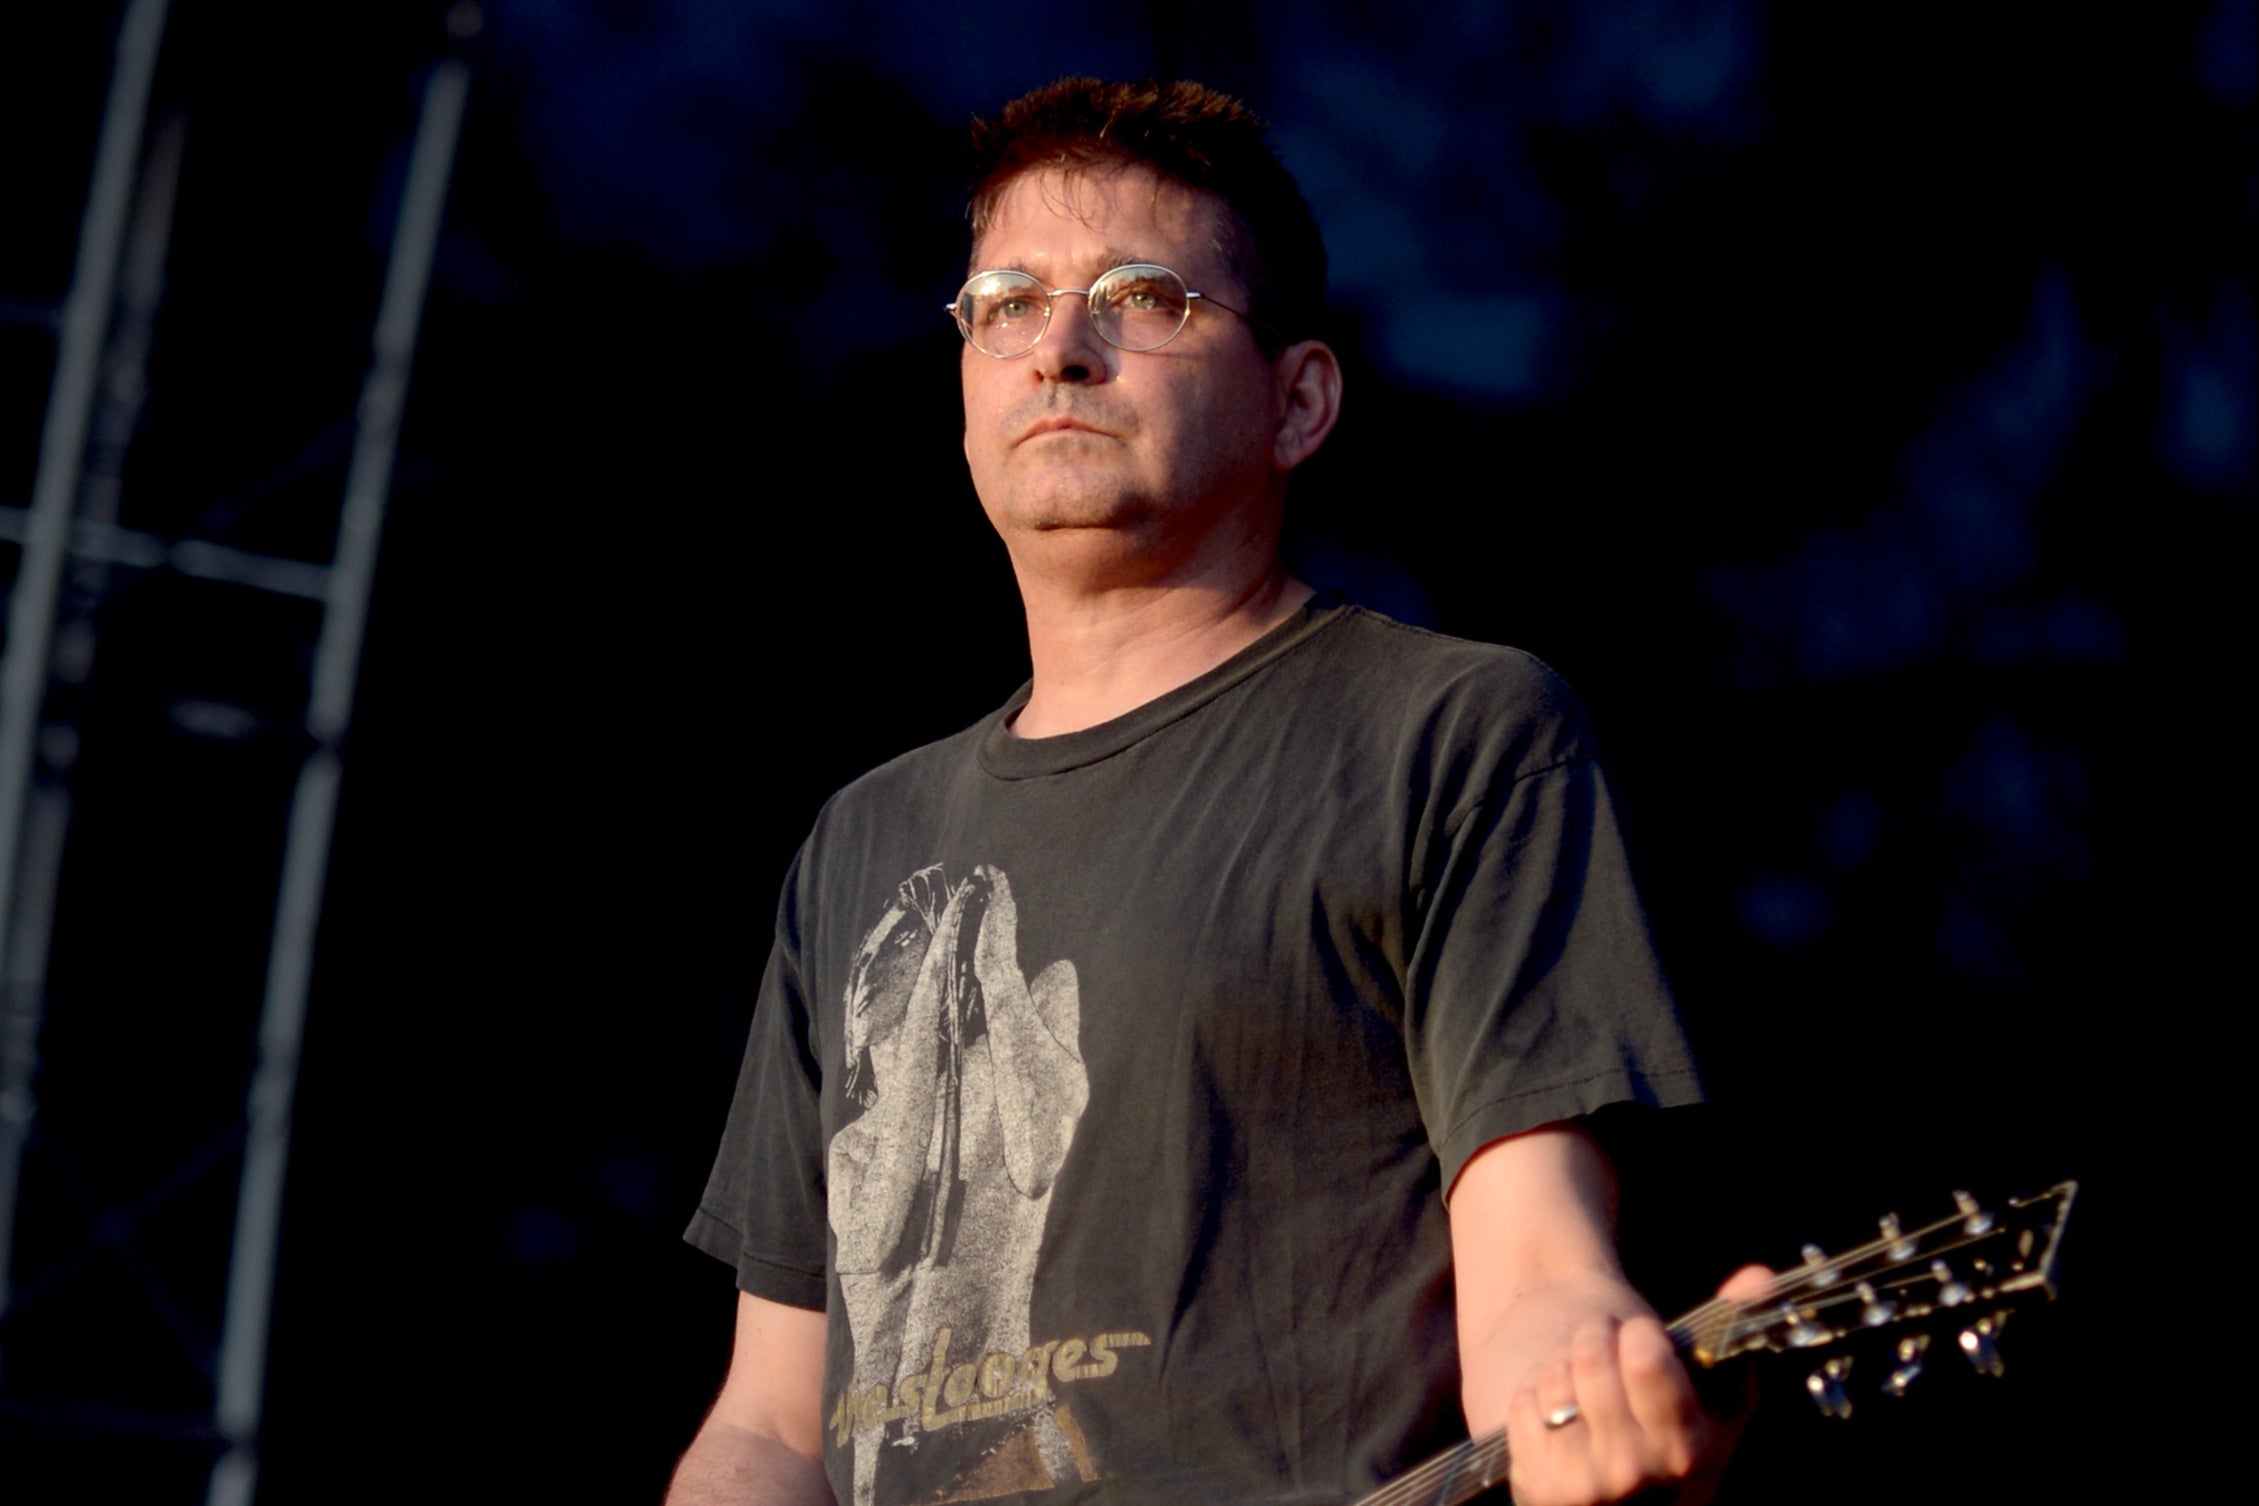 Steve Albini on stage with his band Shellac in Los Angeles in 2016